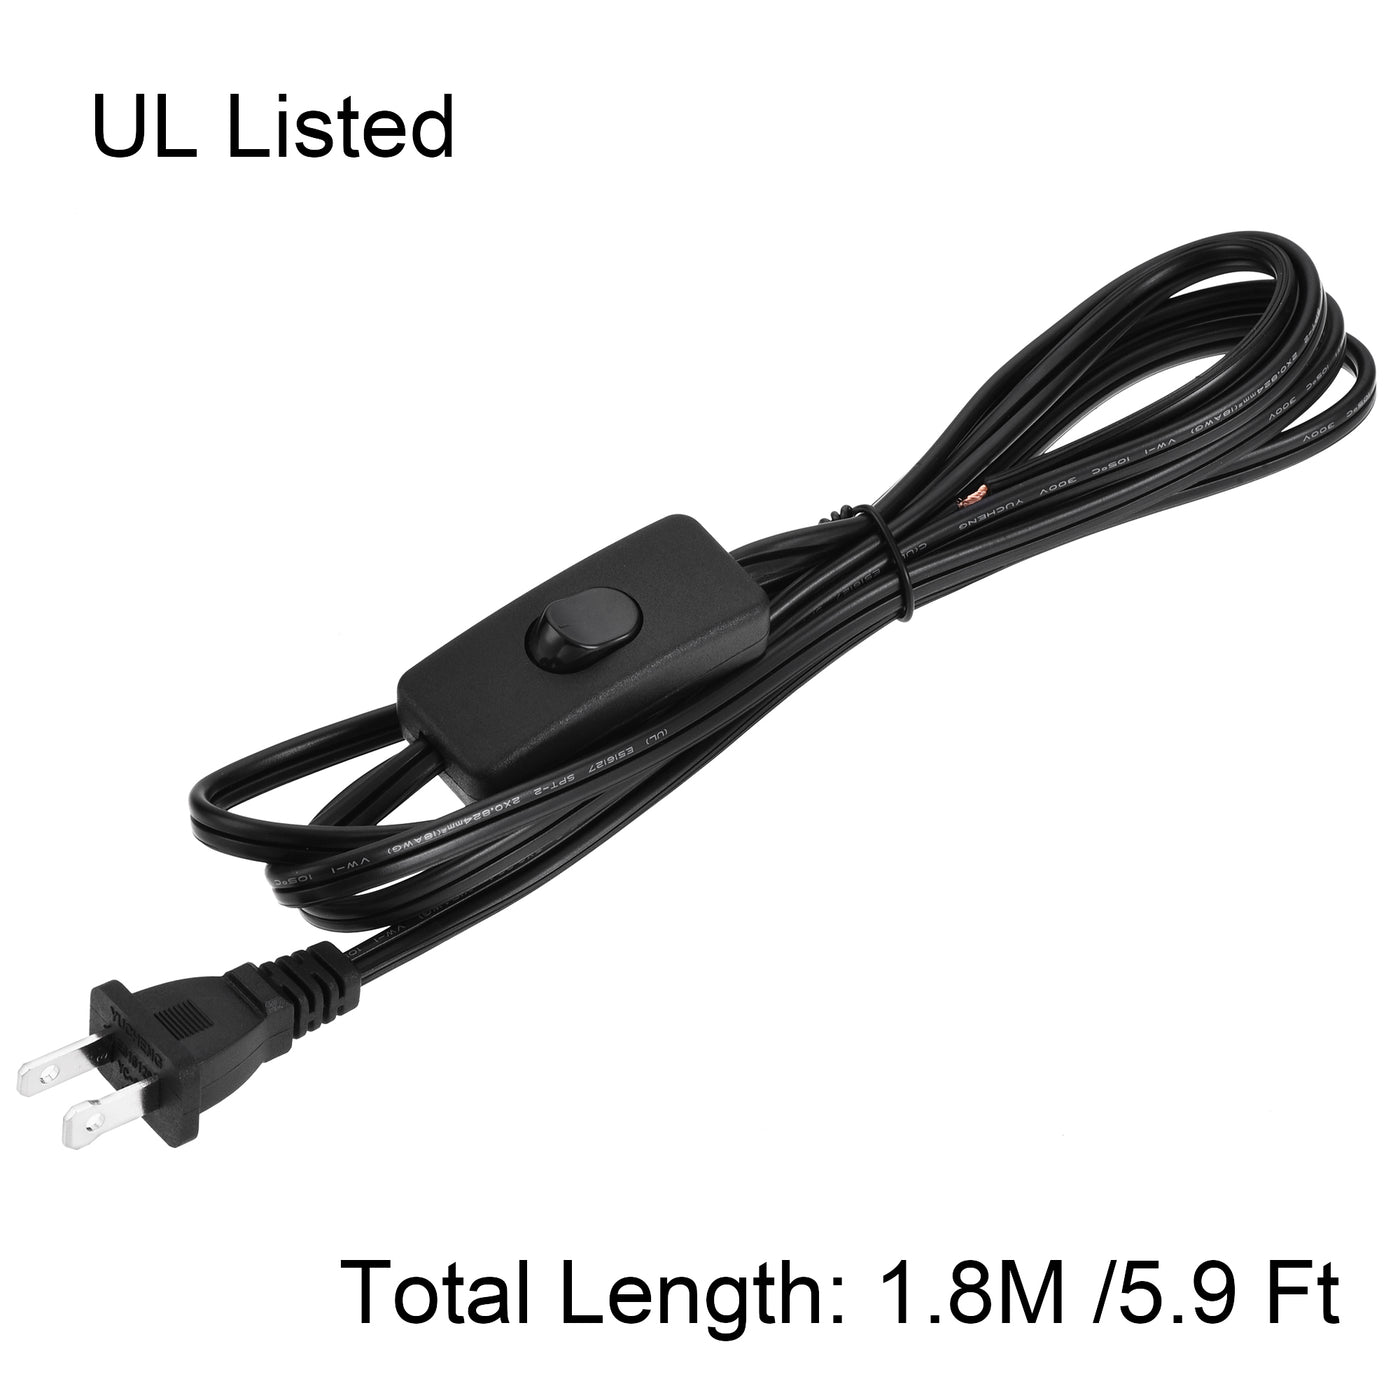 uxcell Uxcell US Plug Lamp Cord with Switch, SPT-2 18AWG Power Wire 1.8M Black, UL Listed 4Pcs